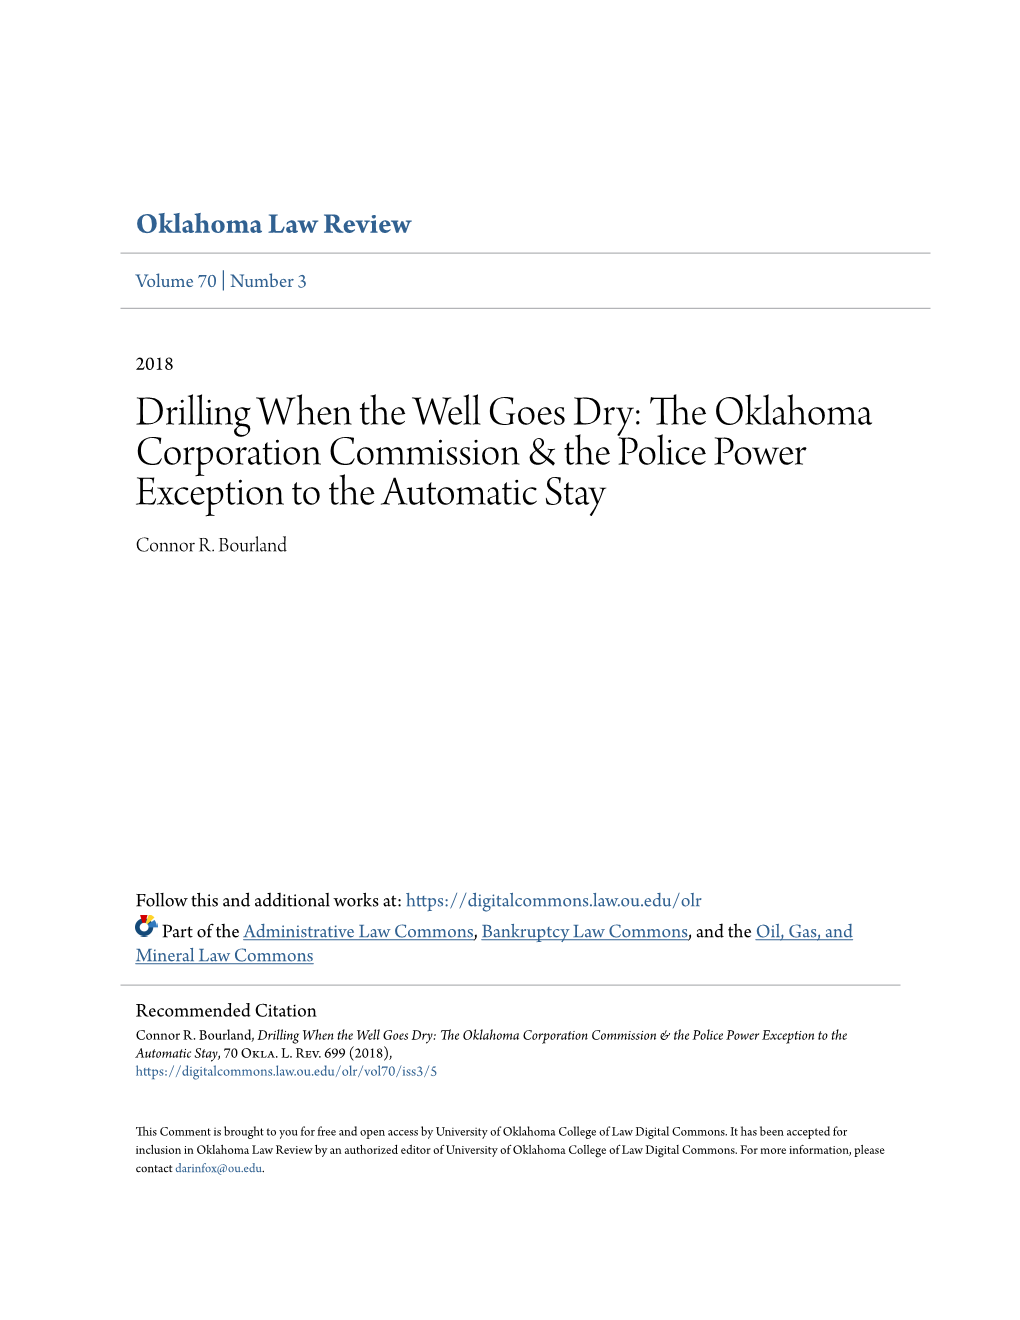 Drilling When the Well Goes Dry: the Oklahoma Corporation Commission & the Police Power Exception to the Automatic Stay Connor R